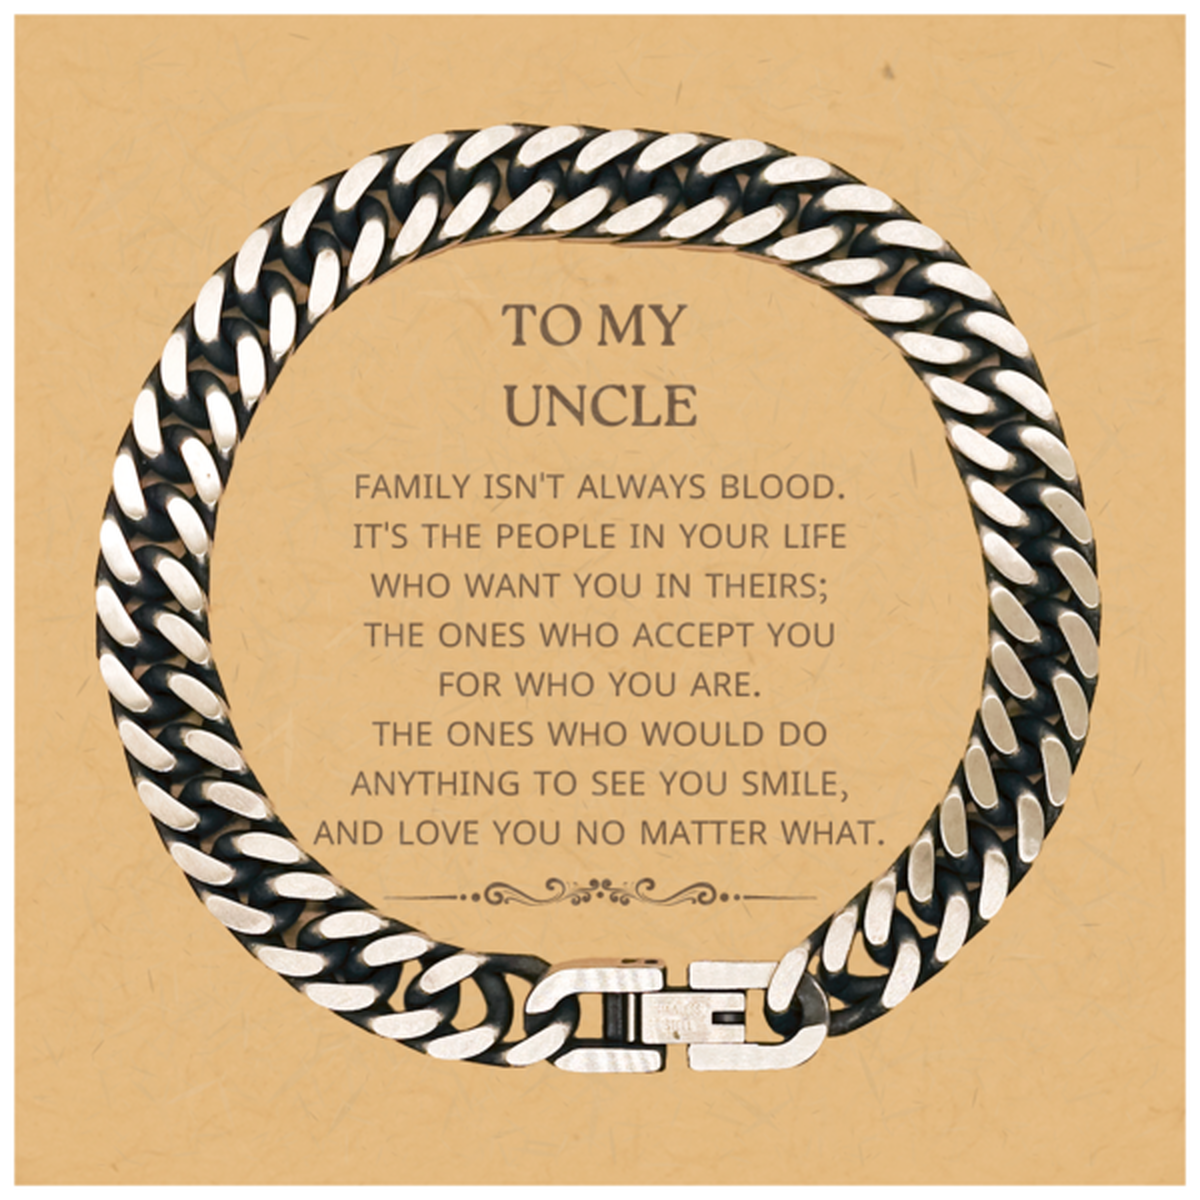 To My Uncle Gifts, Family isn't always blood, Uncle Cuban Link Chain Bracelet, Birthday Christmas Unique Present For Uncle